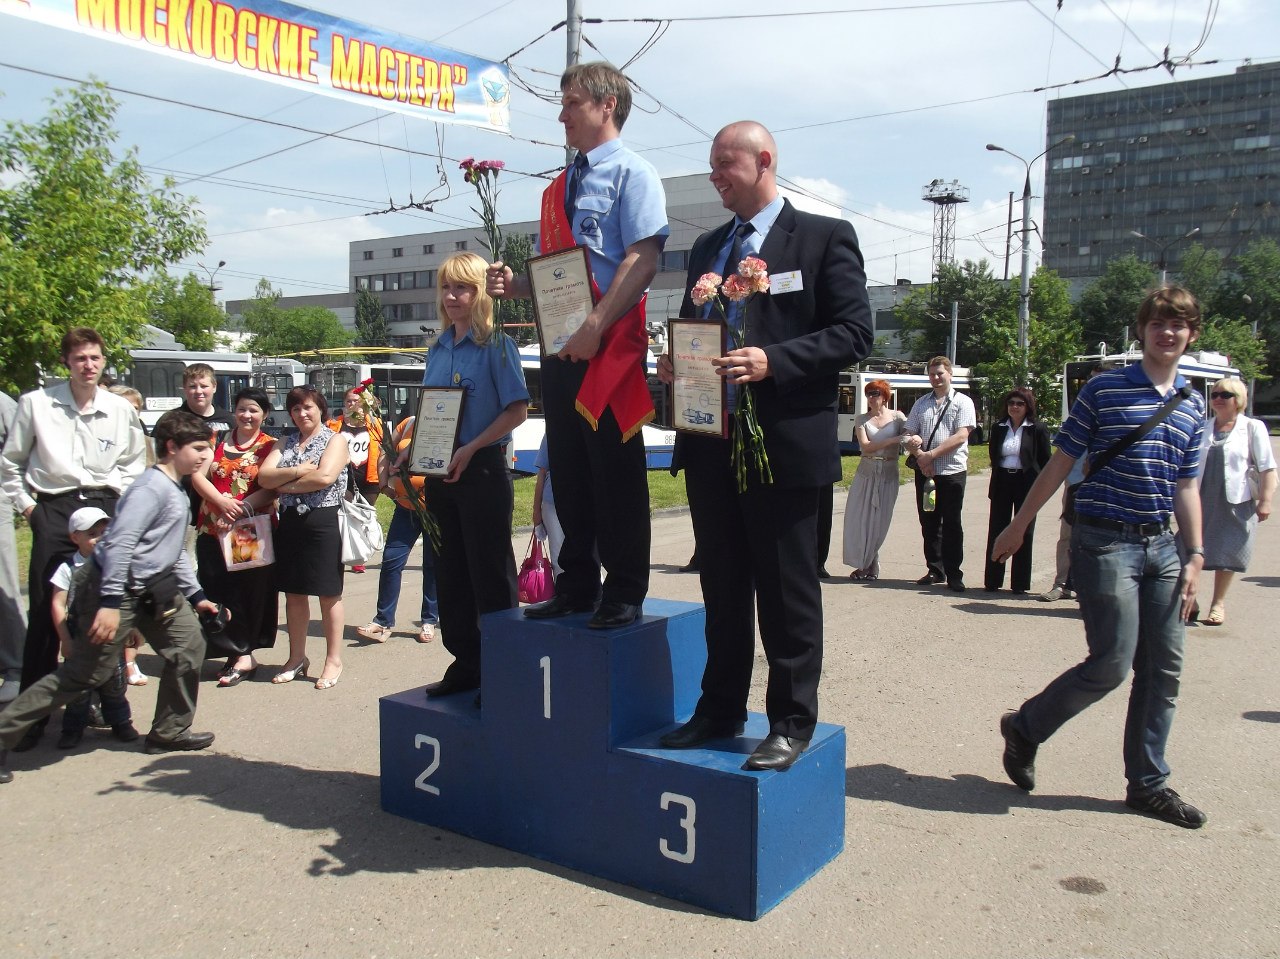 Moskwa — 34th Championship of Trolleybus Drivers